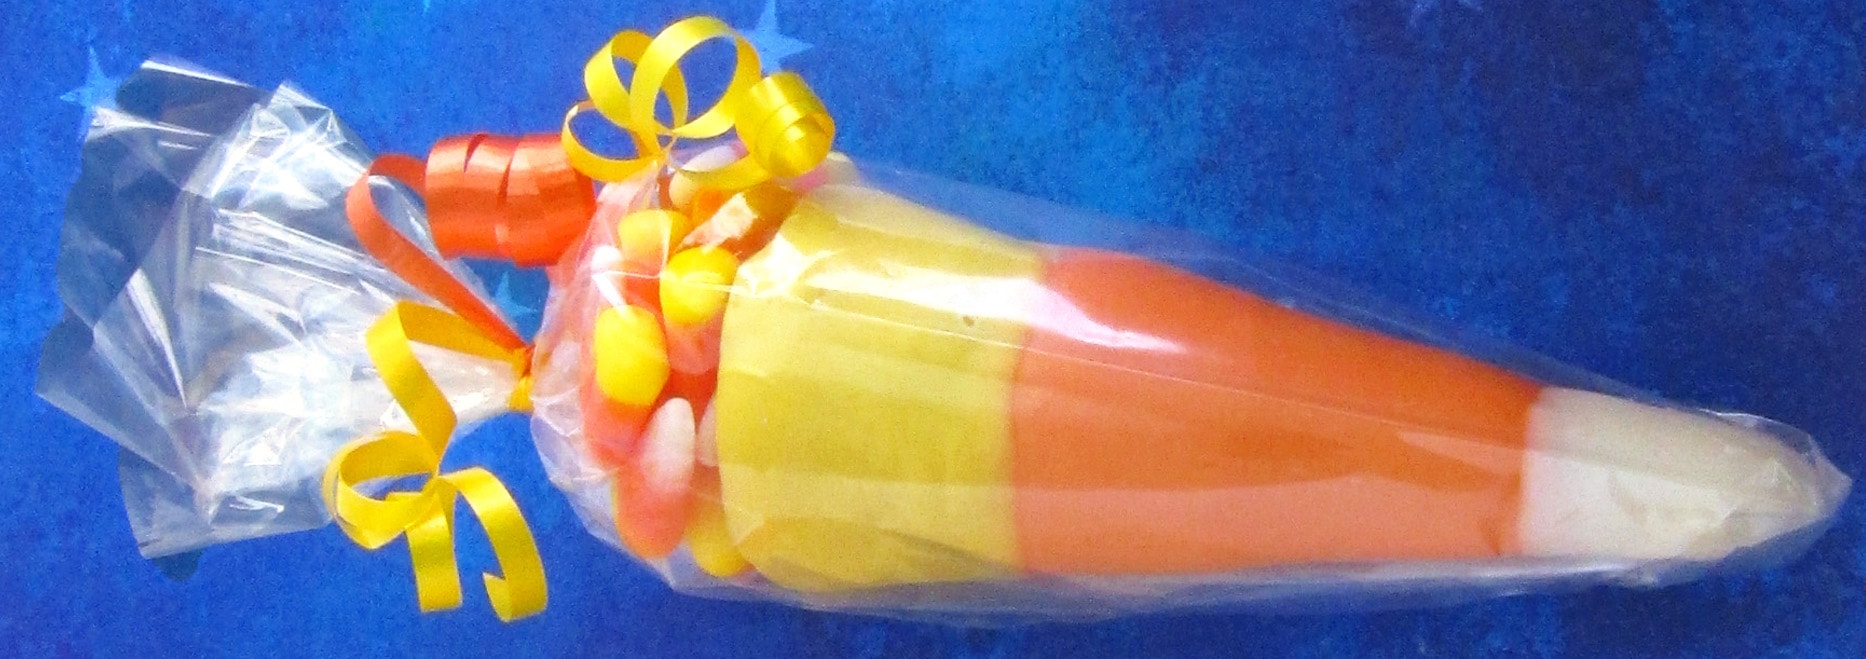 Candy Corn Cones filled with candy corn wrapped in clear cellophane tied with yellow and orange ribbons. 